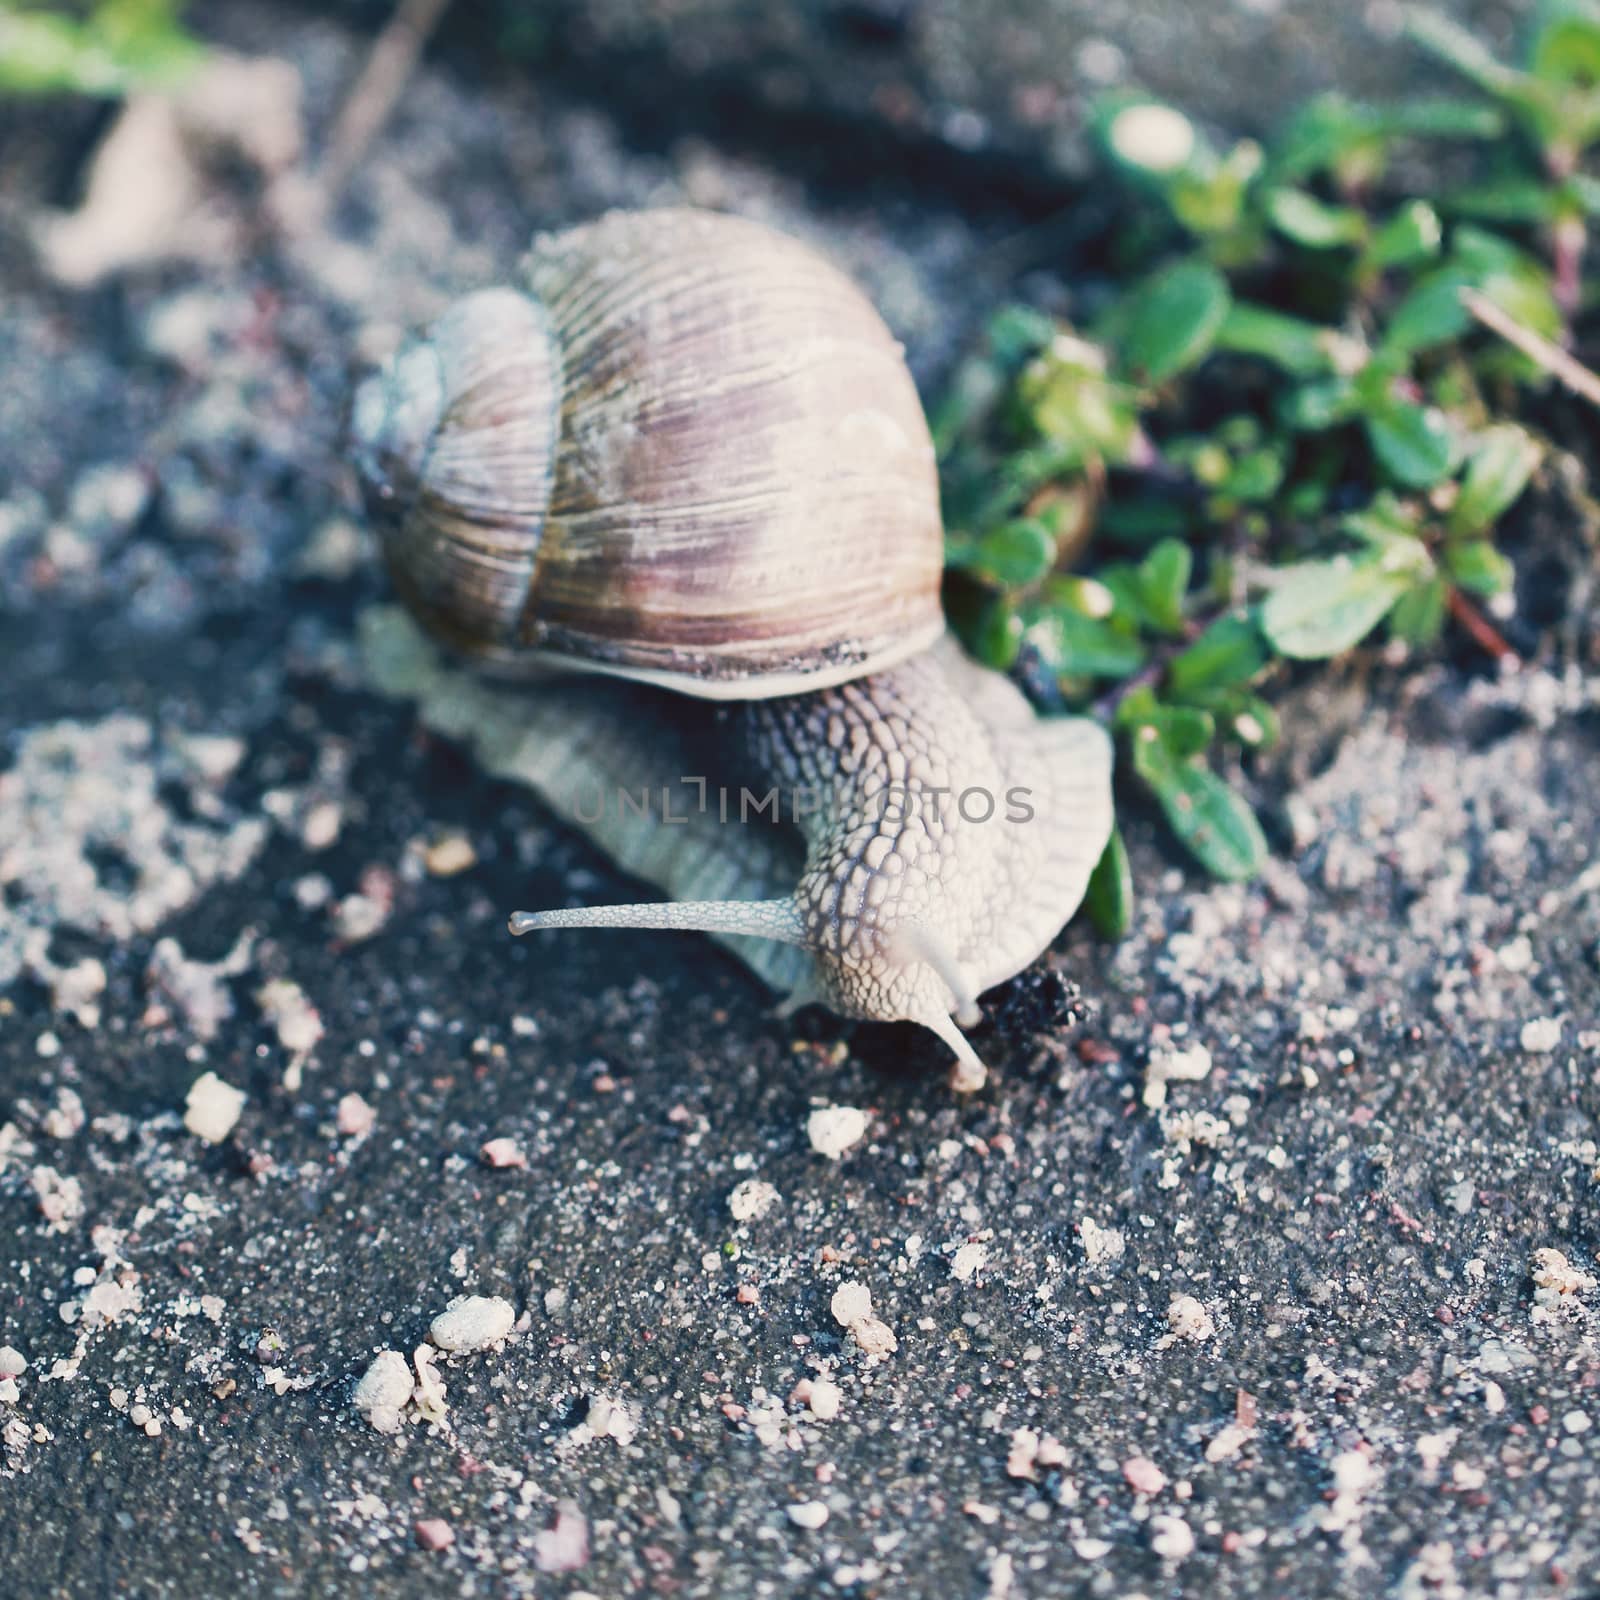 Snail on the road close up photo in retro style